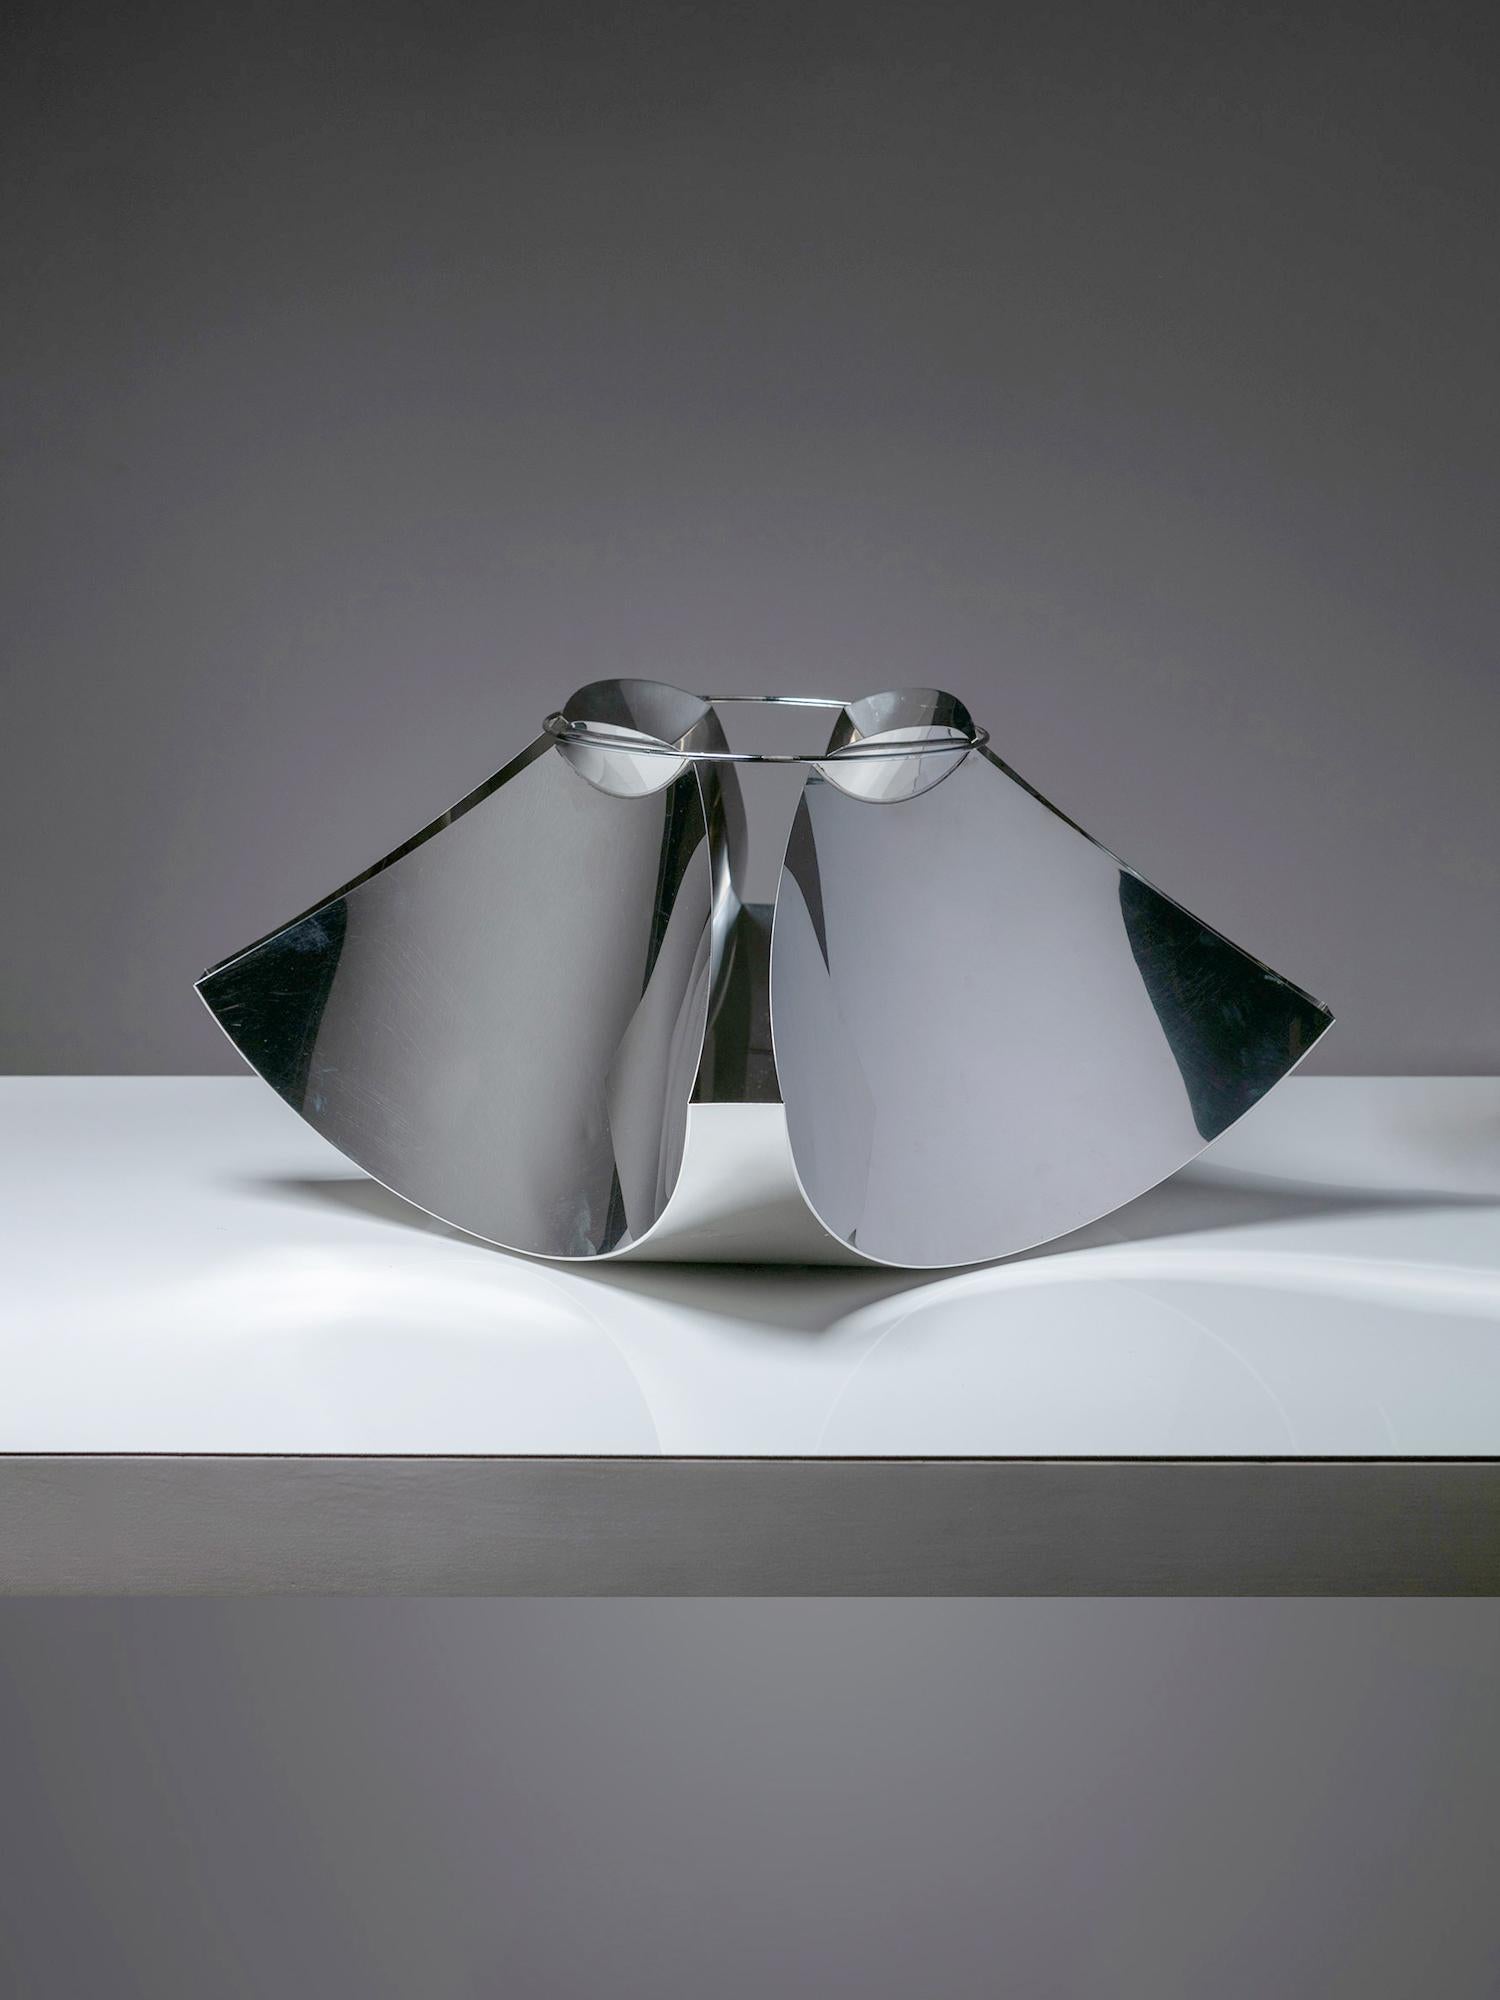 Stainless steel centerpiece by Gian Casè for Robots.
Origami style folded metal sheet, kept in tension by a top metal ring.